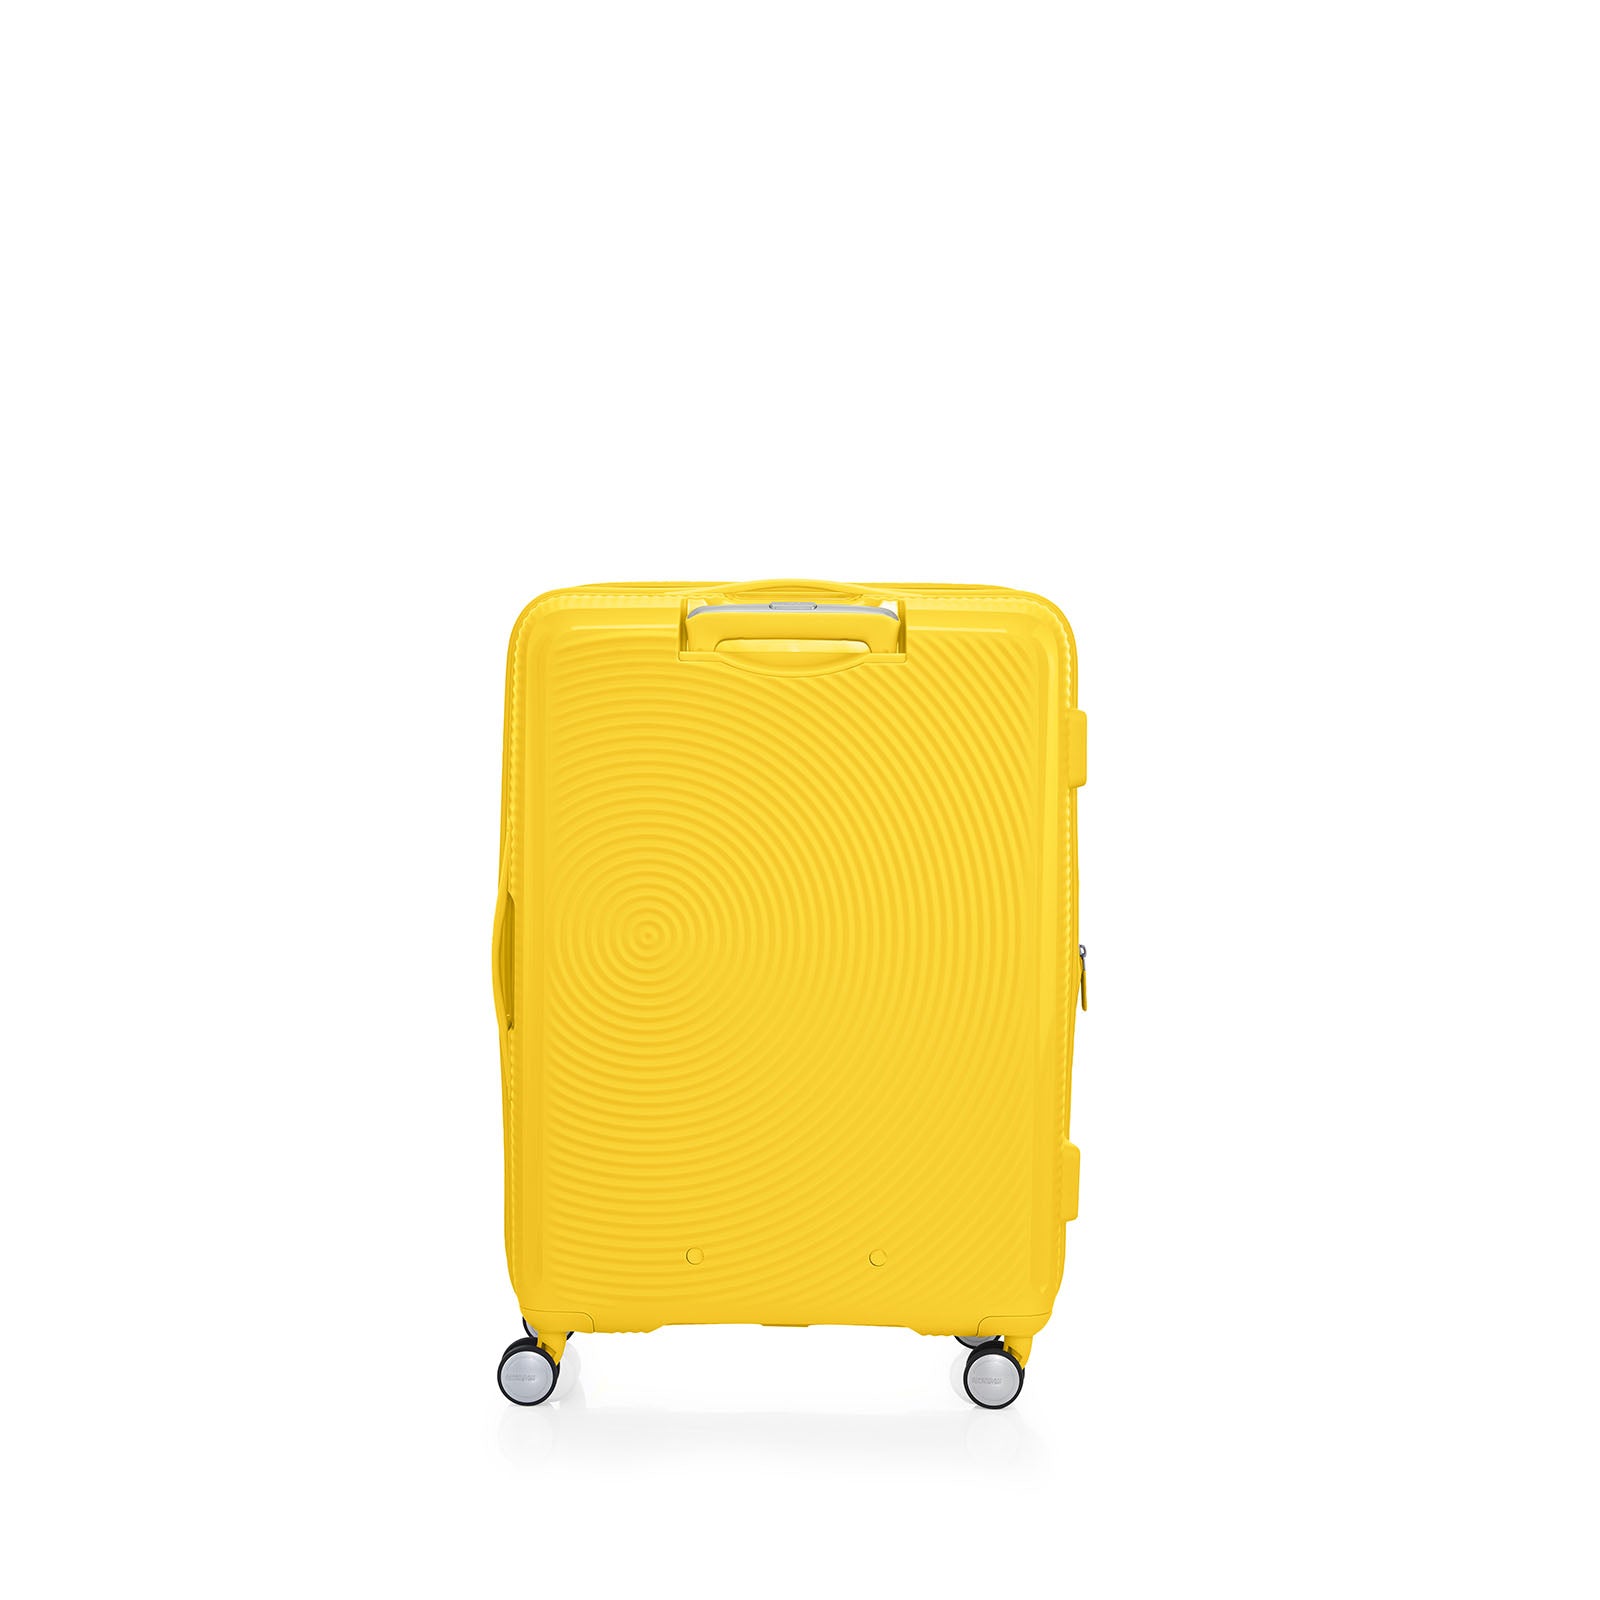 American-Tourister-Curio-2-69cm-Suitcase-Golden-Yellow-Back